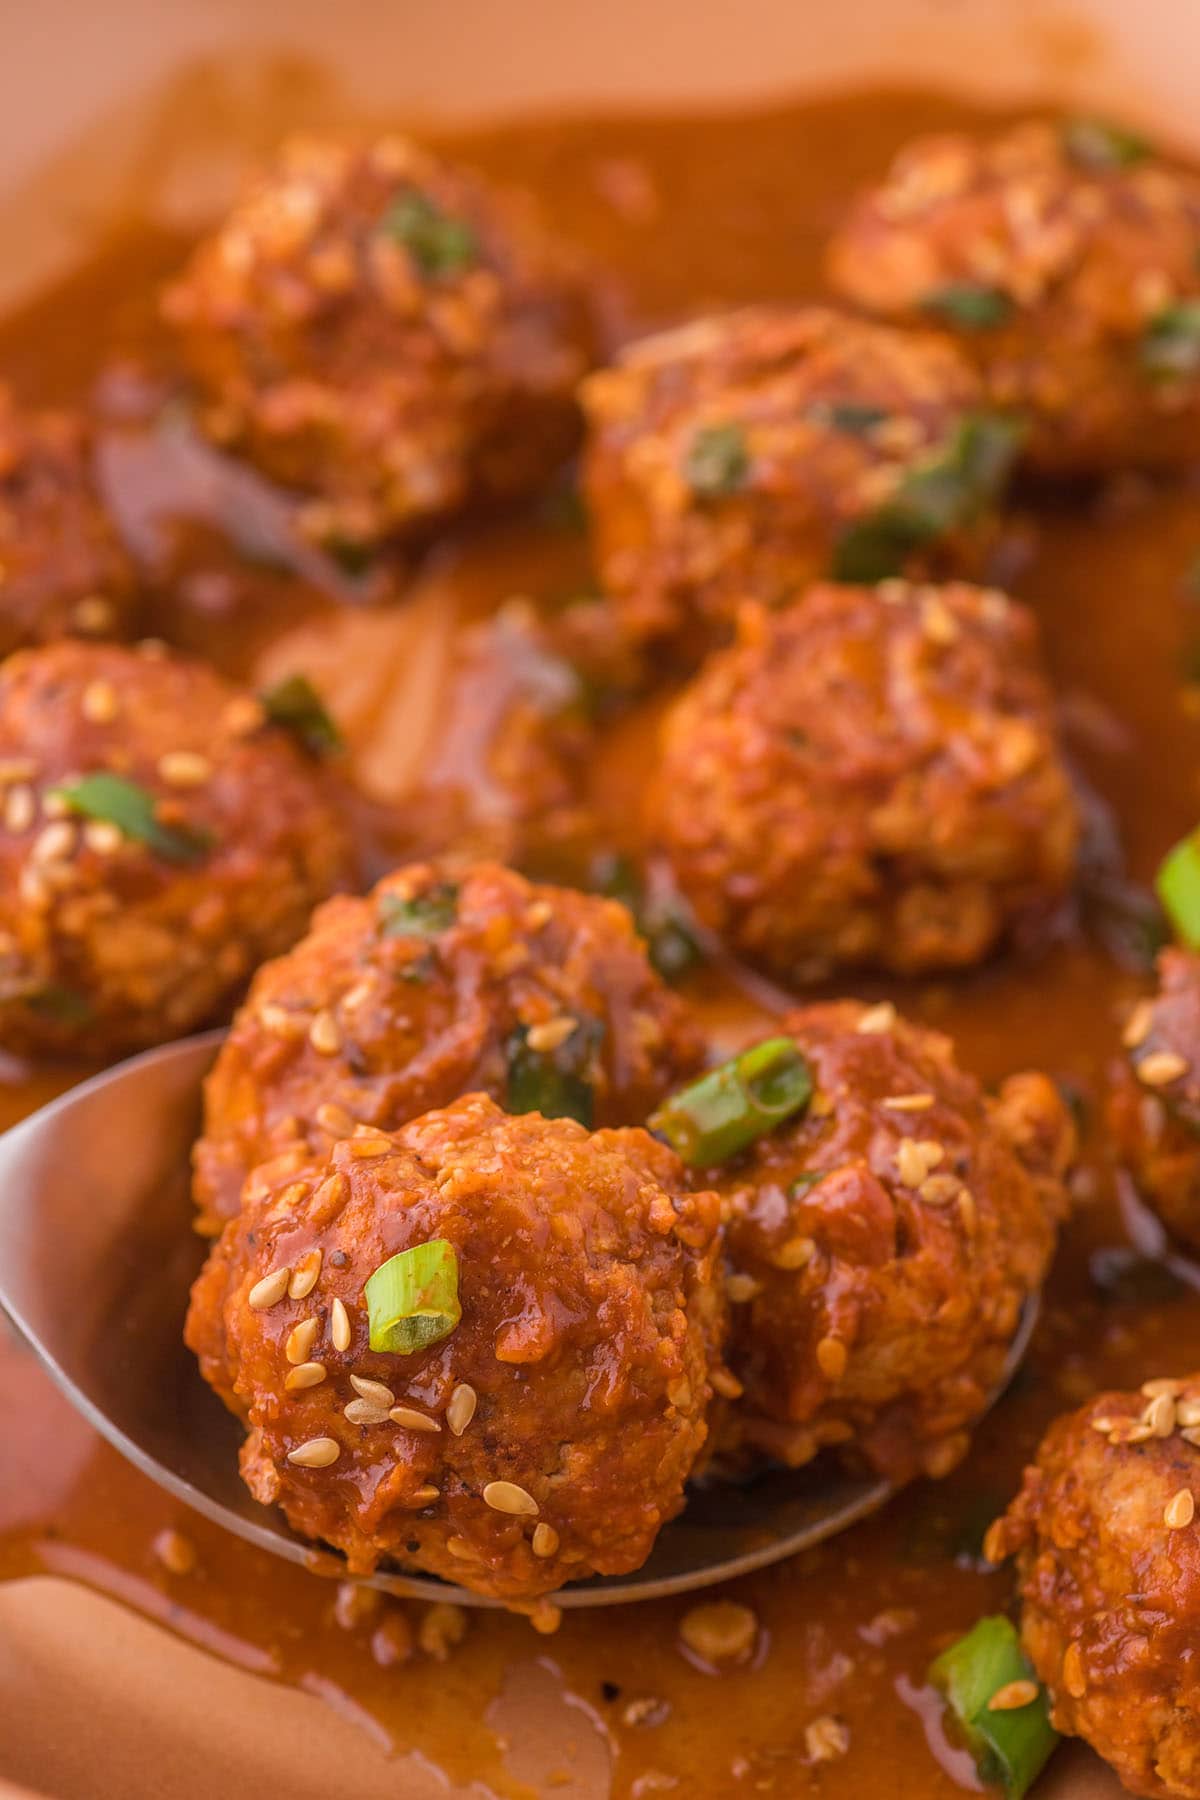 Asian Meatballs scooped using a spoon.